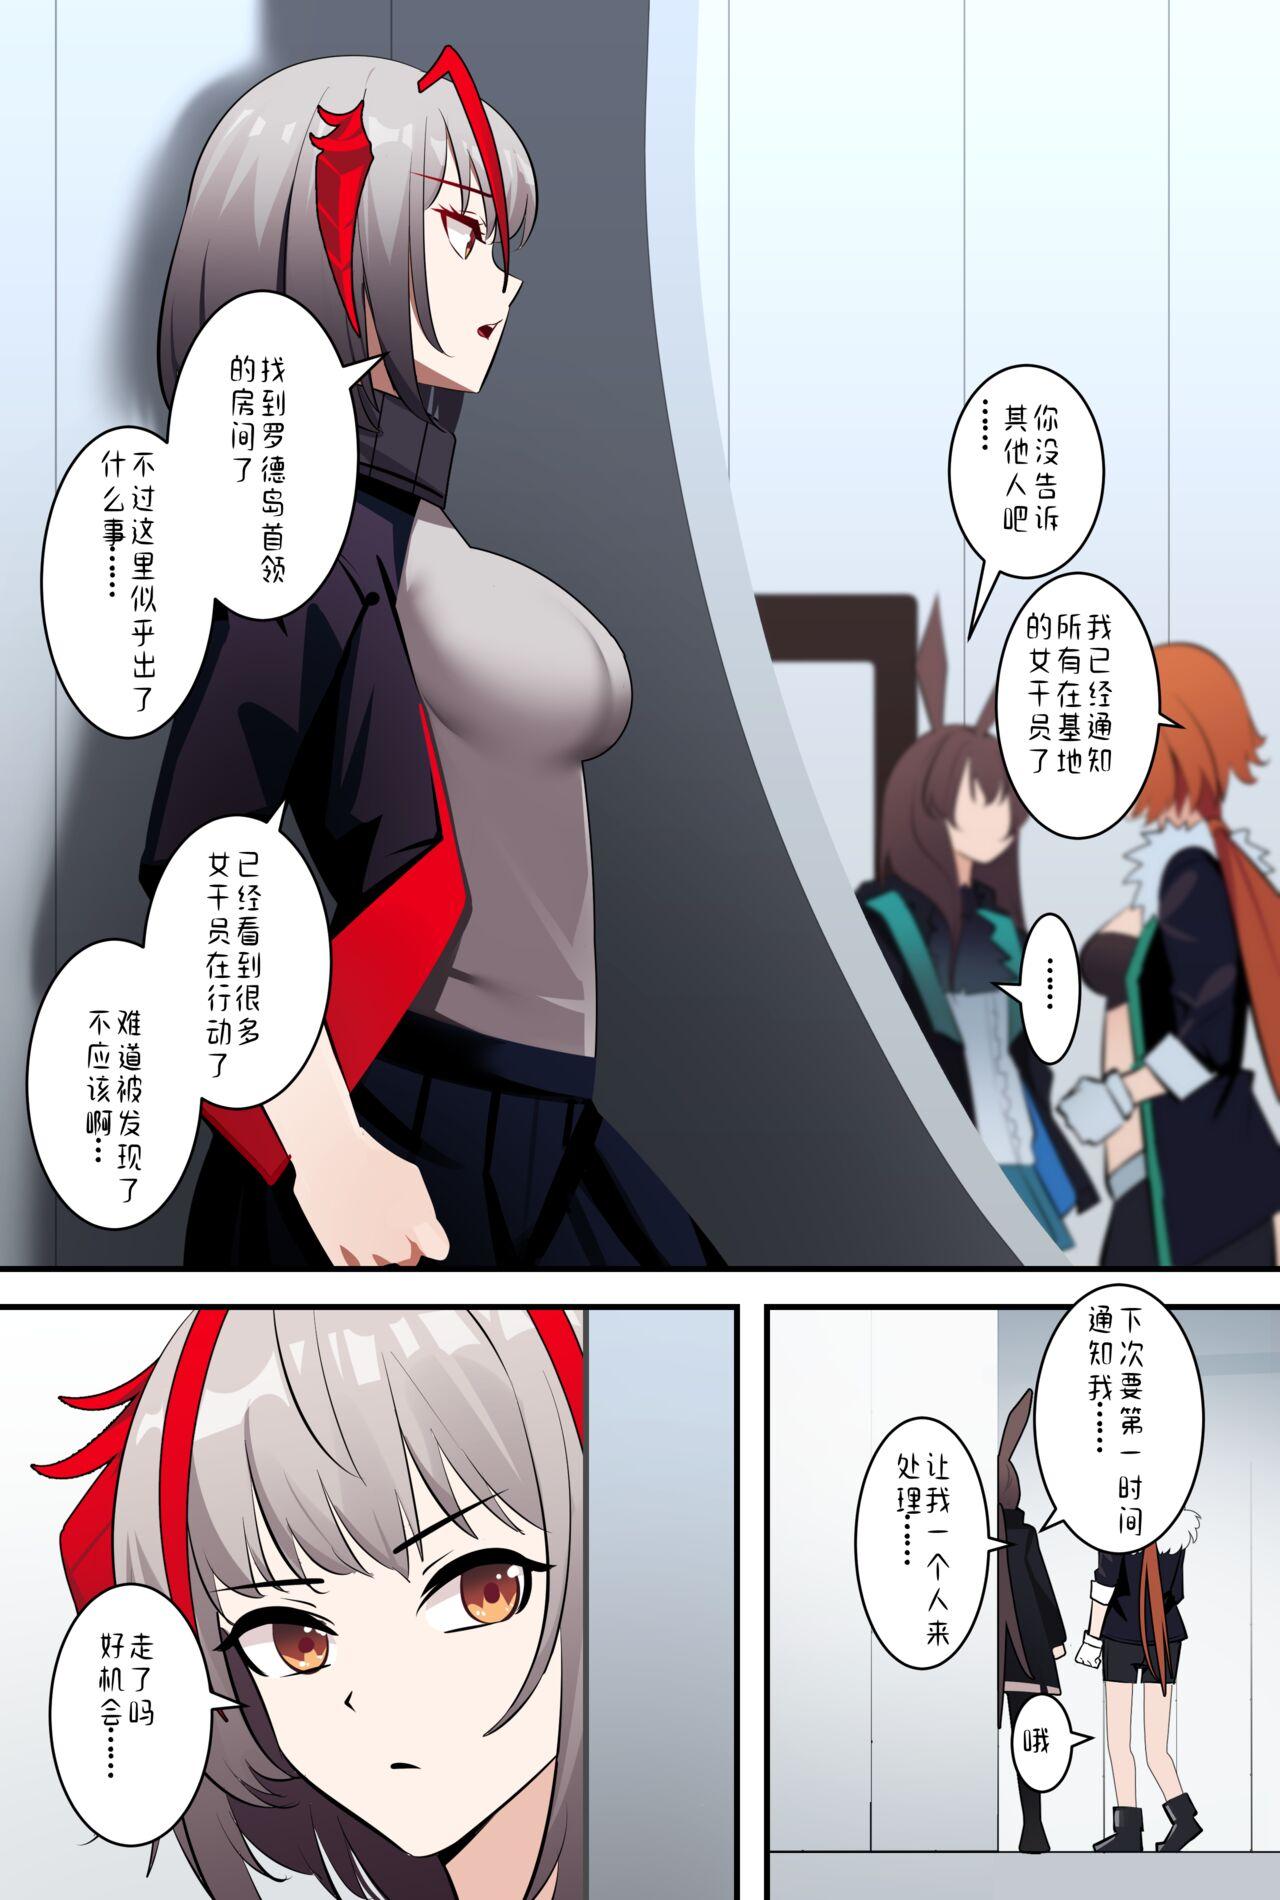 Nice Tits 明日方舟W - Arknights Chastity - Page 7